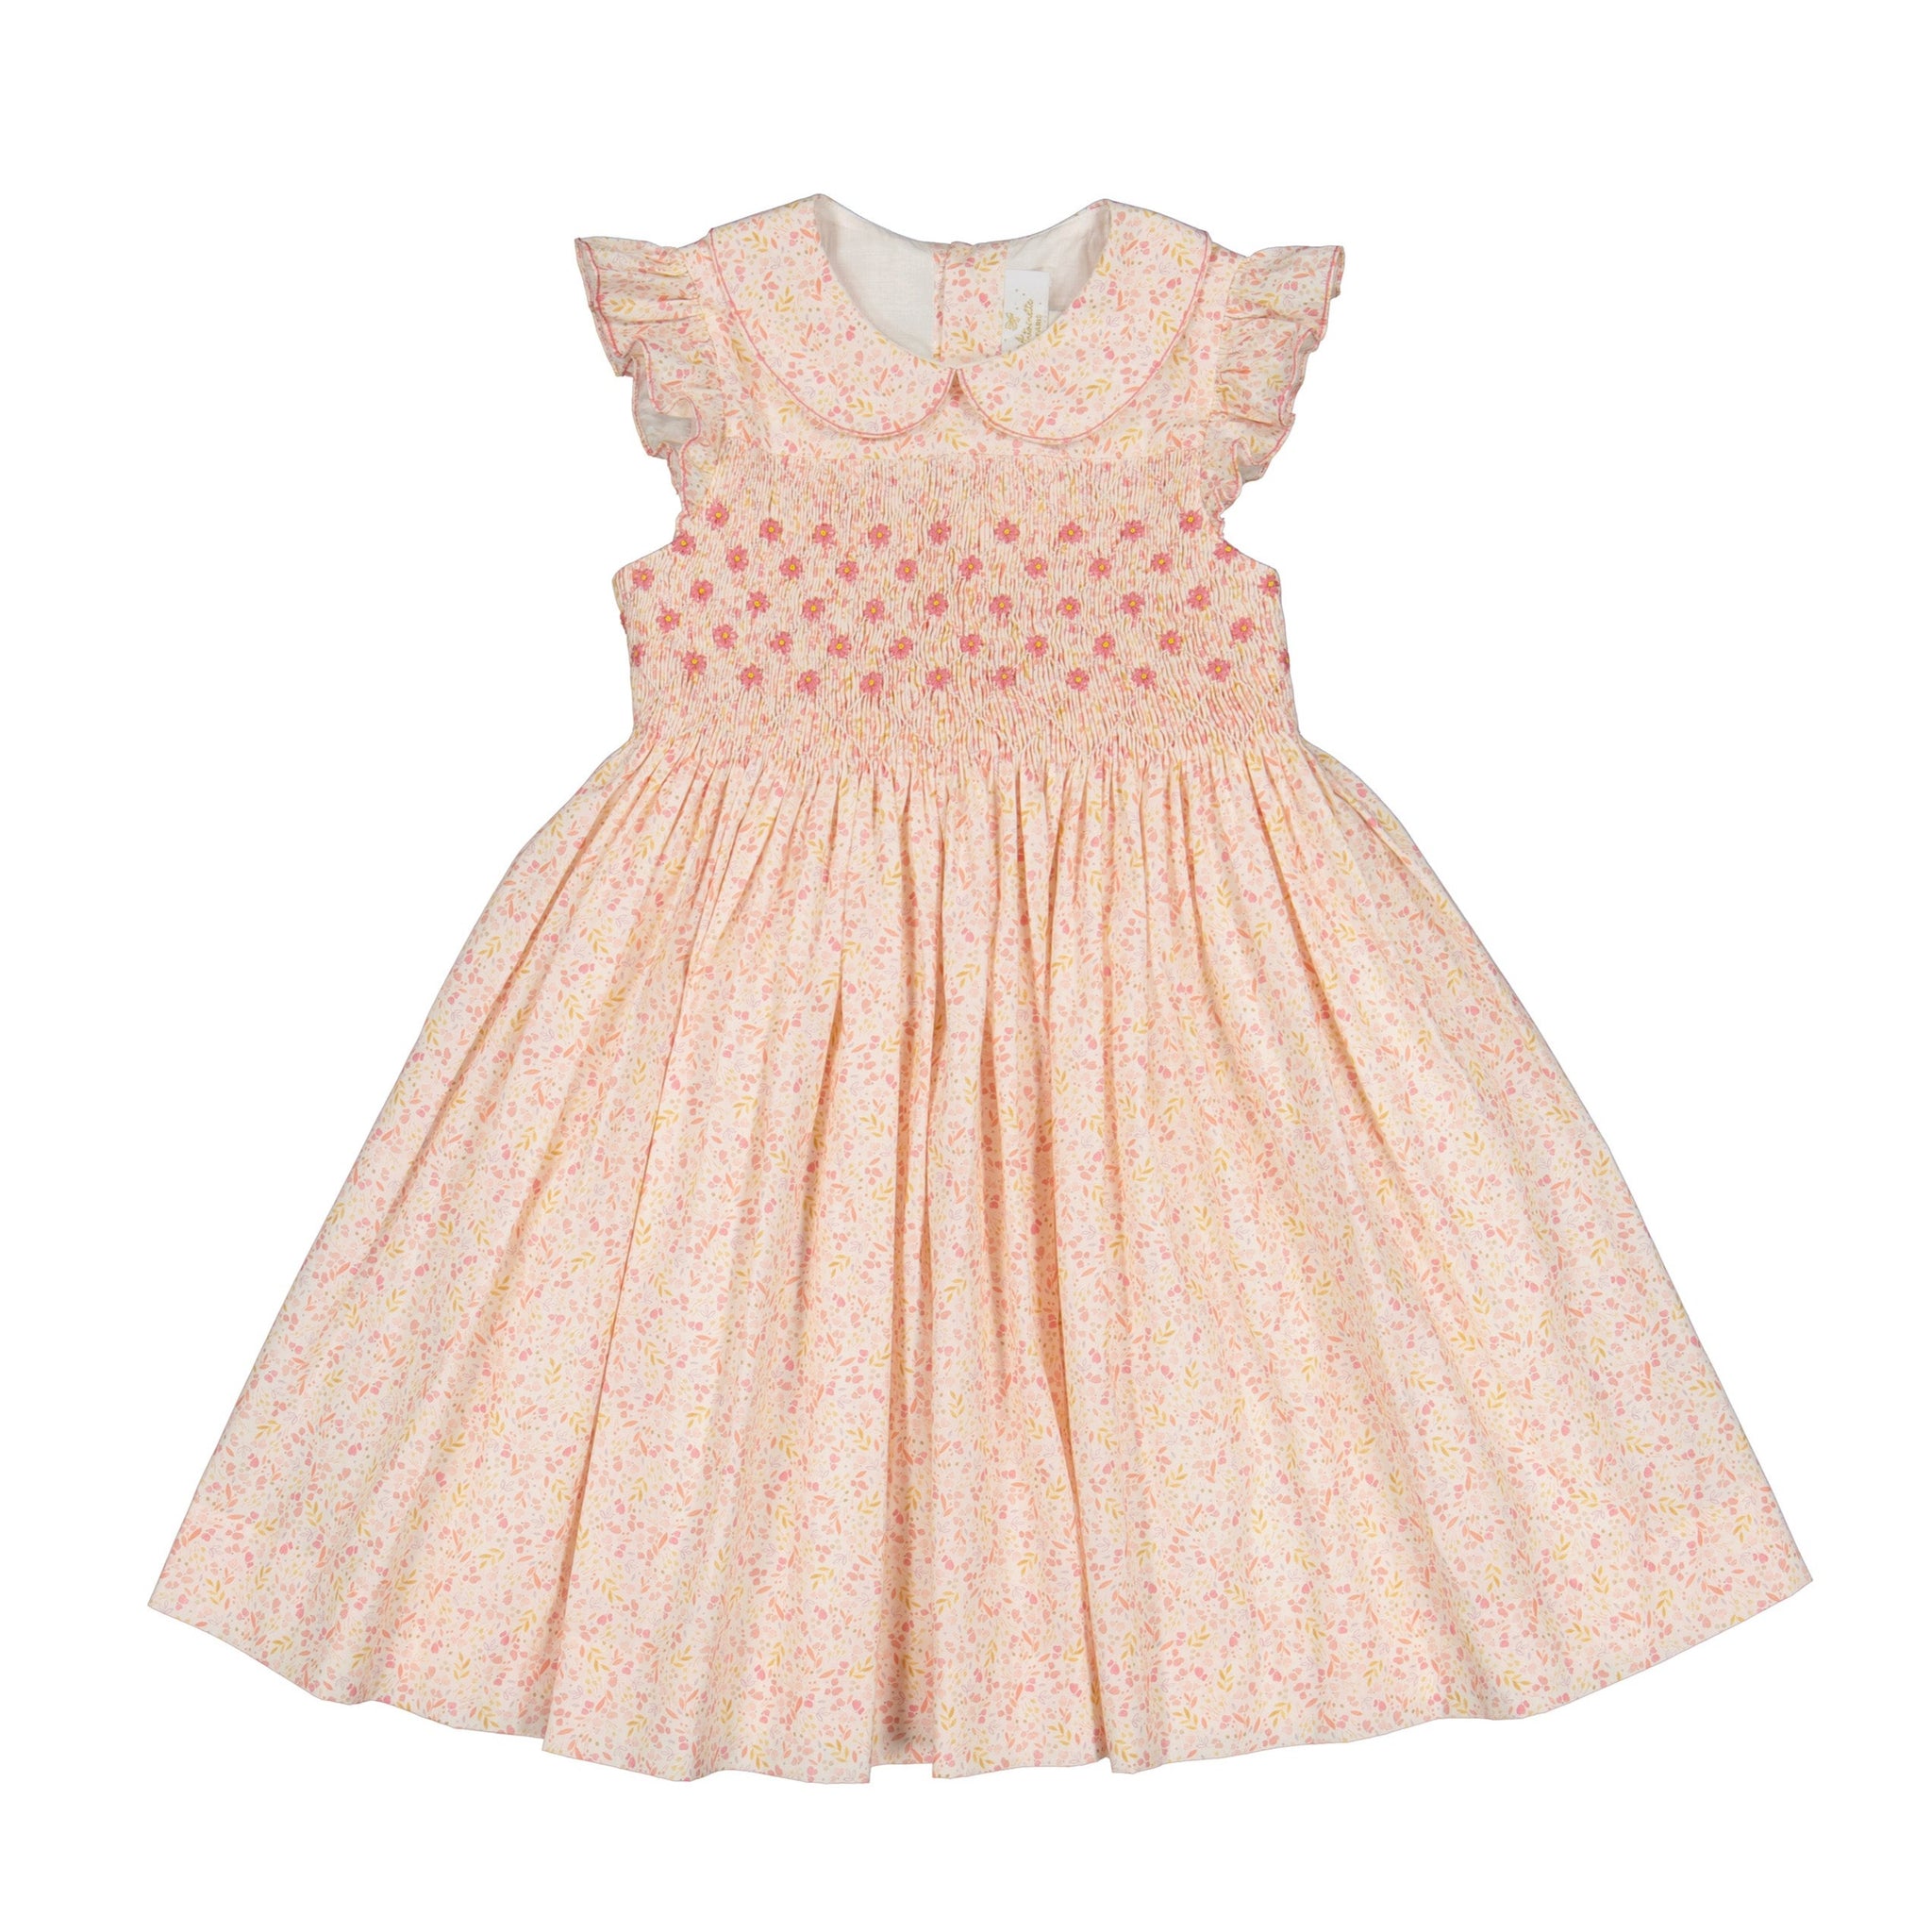 COSMOS PINK FLORAL SMOCKED DRESS